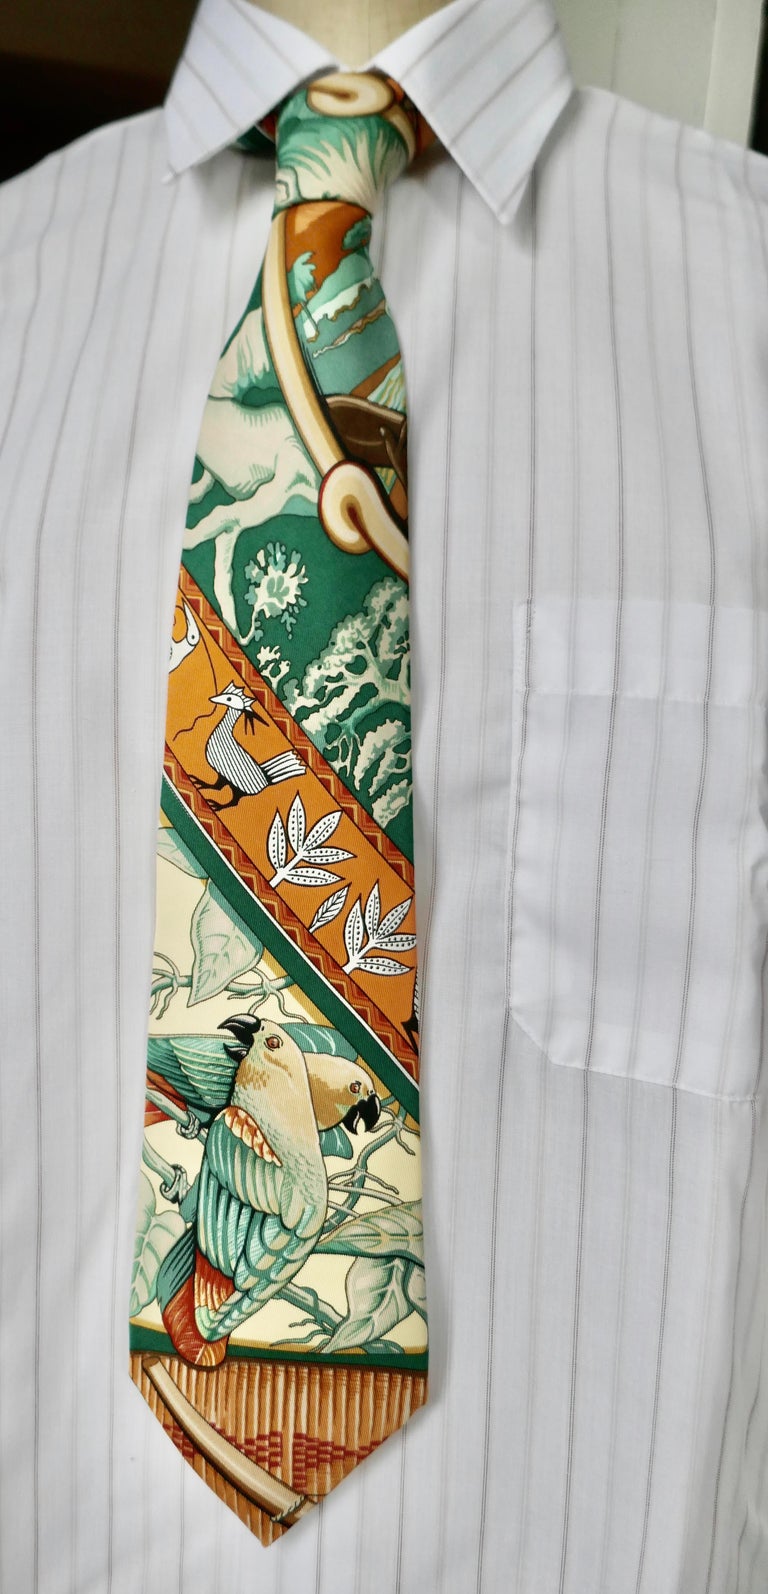 Beautiful Hermes Silk Tie, Colourful Birds Parrots in the Jungle , Hermes Orange Pallet 

Classic Hermes, 100% pure silk

Hermes Orange and Green pallet 
A Very Special tie, instantly recognisable as Hermes by those in the know
100% silk 
Silk